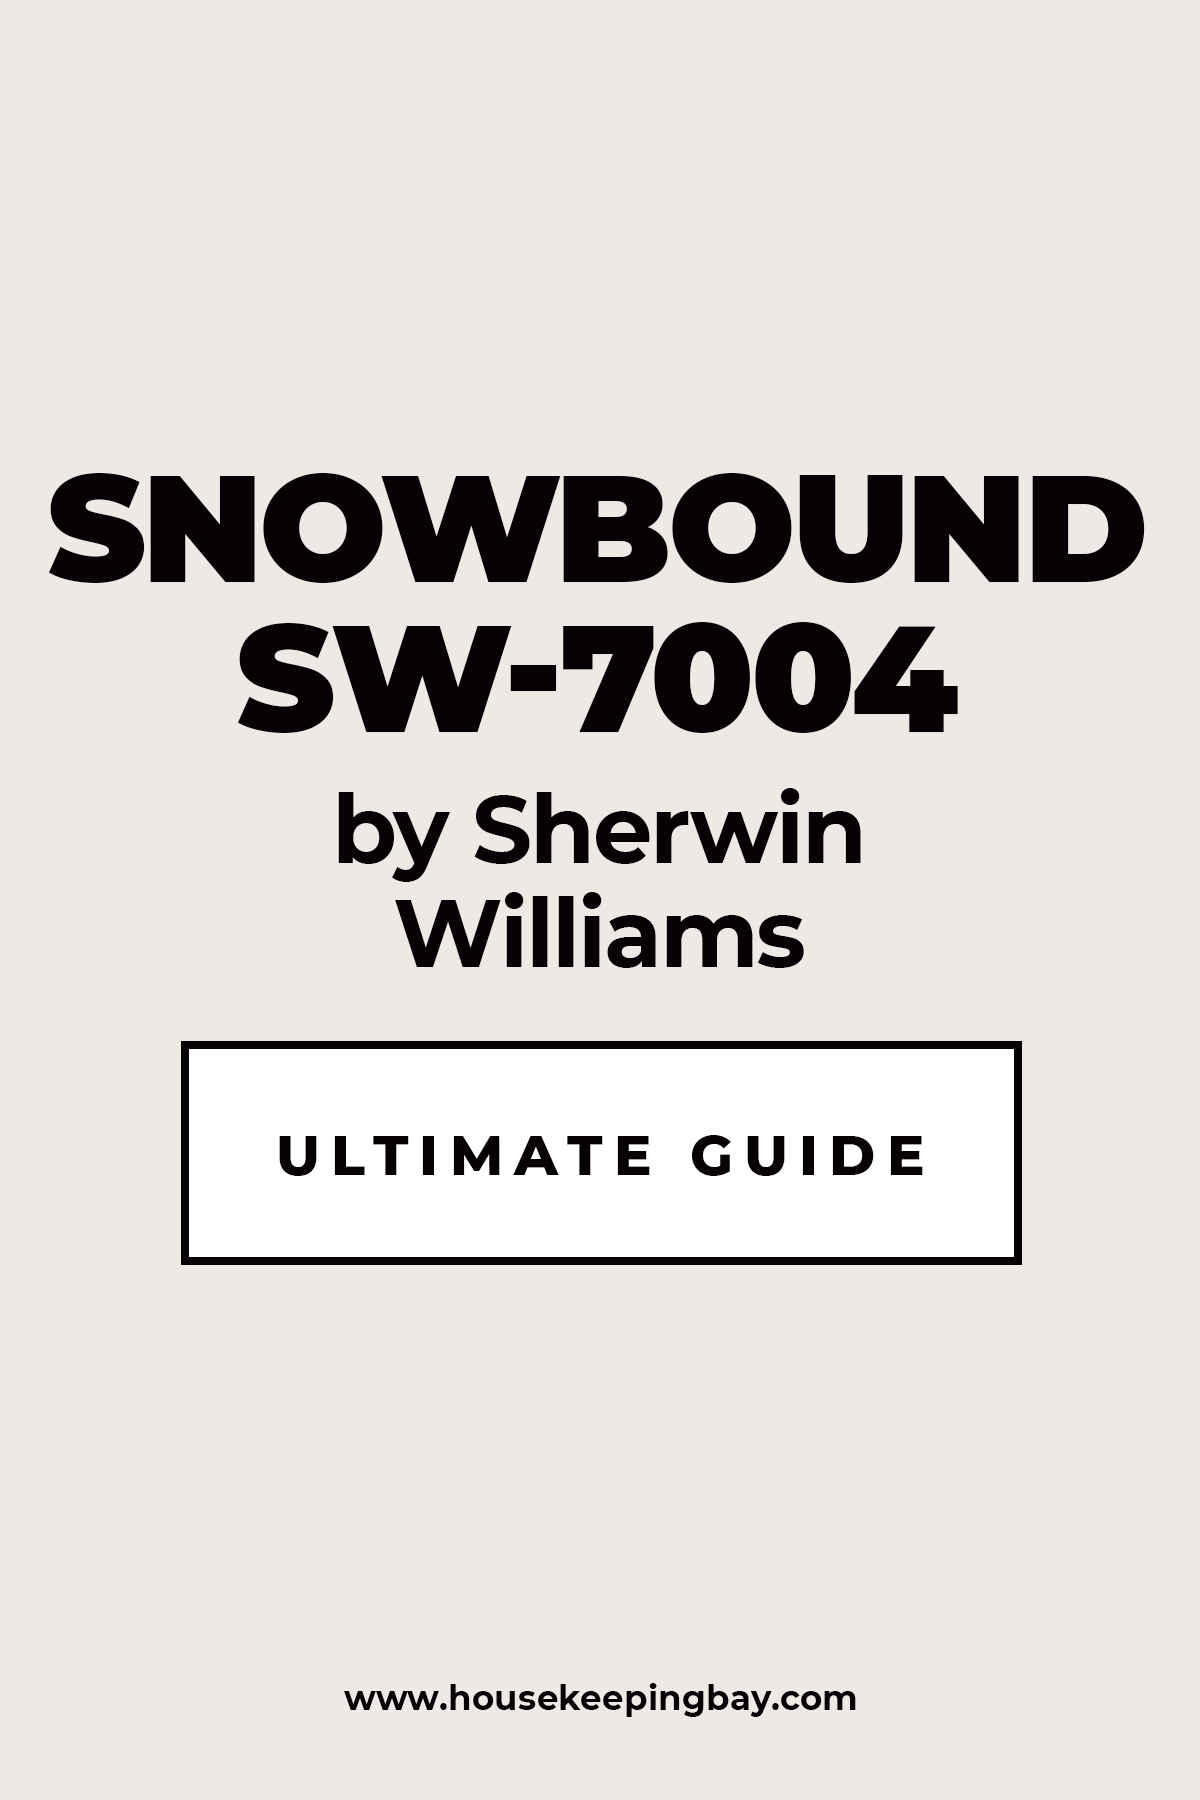 Sherwin Williams Snowbound SW-7004 Ultimate guide